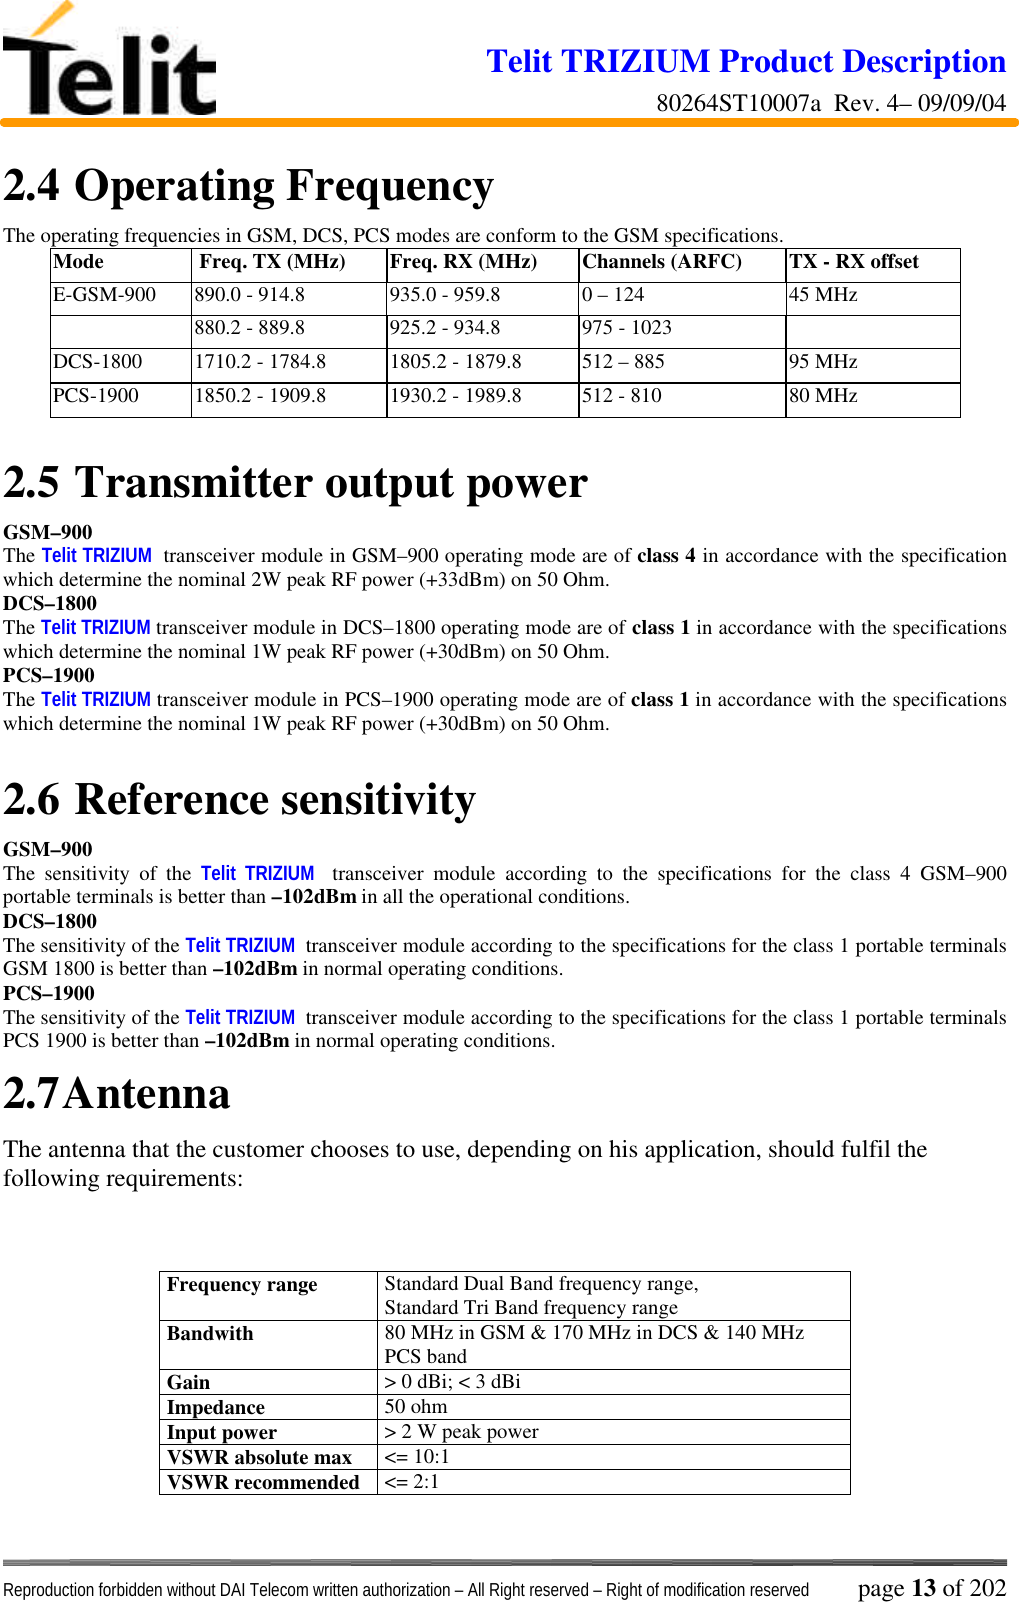 Telit TRIZIUM Product Description80264ST10007a  Rev. 4– 09/09/04Reproduction forbidden without DAI Telecom written authorization – All Right reserved – Right of modification reserved page 13 of 2022.4  Operating FrequencyThe operating frequencies in GSM, DCS, PCS modes are conform to the GSM specifications.Mode  Freq. TX (MHz) Freq. RX (MHz) Channels (ARFC) TX - RX offsetE-GSM-900 890.0 - 914.8 935.0 - 959.8 0 – 124 45 MHz880.2 - 889.8 925.2 - 934.8 975 - 1023DCS-1800 1710.2 - 1784.8 1805.2 - 1879.8 512 – 885 95 MHzPCS-1900 1850.2 - 1909.8 1930.2 - 1989.8 512 - 810 80 MHz2.5  Transmitter output powerGSM–900The Telit TRIZIUM  transceiver module in GSM–900 operating mode are of class 4 in accordance with the specificationwhich determine the nominal 2W peak RF power (+33dBm) on 50 Ohm.DCS–1800The Telit TRIZIUM transceiver module in DCS–1800 operating mode are of class 1 in accordance with the specificationswhich determine the nominal 1W peak RF power (+30dBm) on 50 Ohm.PCS–1900The Telit TRIZIUM transceiver module in PCS–1900 operating mode are of class 1 in accordance with the specificationswhich determine the nominal 1W peak RF power (+30dBm) on 50 Ohm.2.6  Reference sensitivityGSM–900The sensitivity of the Telit TRIZIUM  transceiver module according to the specifications for the class 4 GSM–900portable terminals is better than –102dBm in all the operational conditions.DCS–1800The sensitivity of the Telit TRIZIUM  transceiver module according to the specifications for the class 1 portable terminalsGSM 1800 is better than –102dBm in normal operating conditions.PCS–1900The sensitivity of the Telit TRIZIUM  transceiver module according to the specifications for the class 1 portable terminalsPCS 1900 is better than –102dBm in normal operating conditions.2.7 AntennaThe antenna that the customer chooses to use, depending on his application, should fulfil thefollowing requirements:Frequency range Standard Dual Band frequency range,Standard Tri Band frequency rangeBandwith 80 MHz in GSM &amp; 170 MHz in DCS &amp; 140 MHzPCS bandGain &gt; 0 dBi; &lt; 3 dBiImpedance 50 ohmInput power &gt; 2 W peak powerVSWR absolute max &lt;= 10:1VSWR recommended &lt;= 2:1